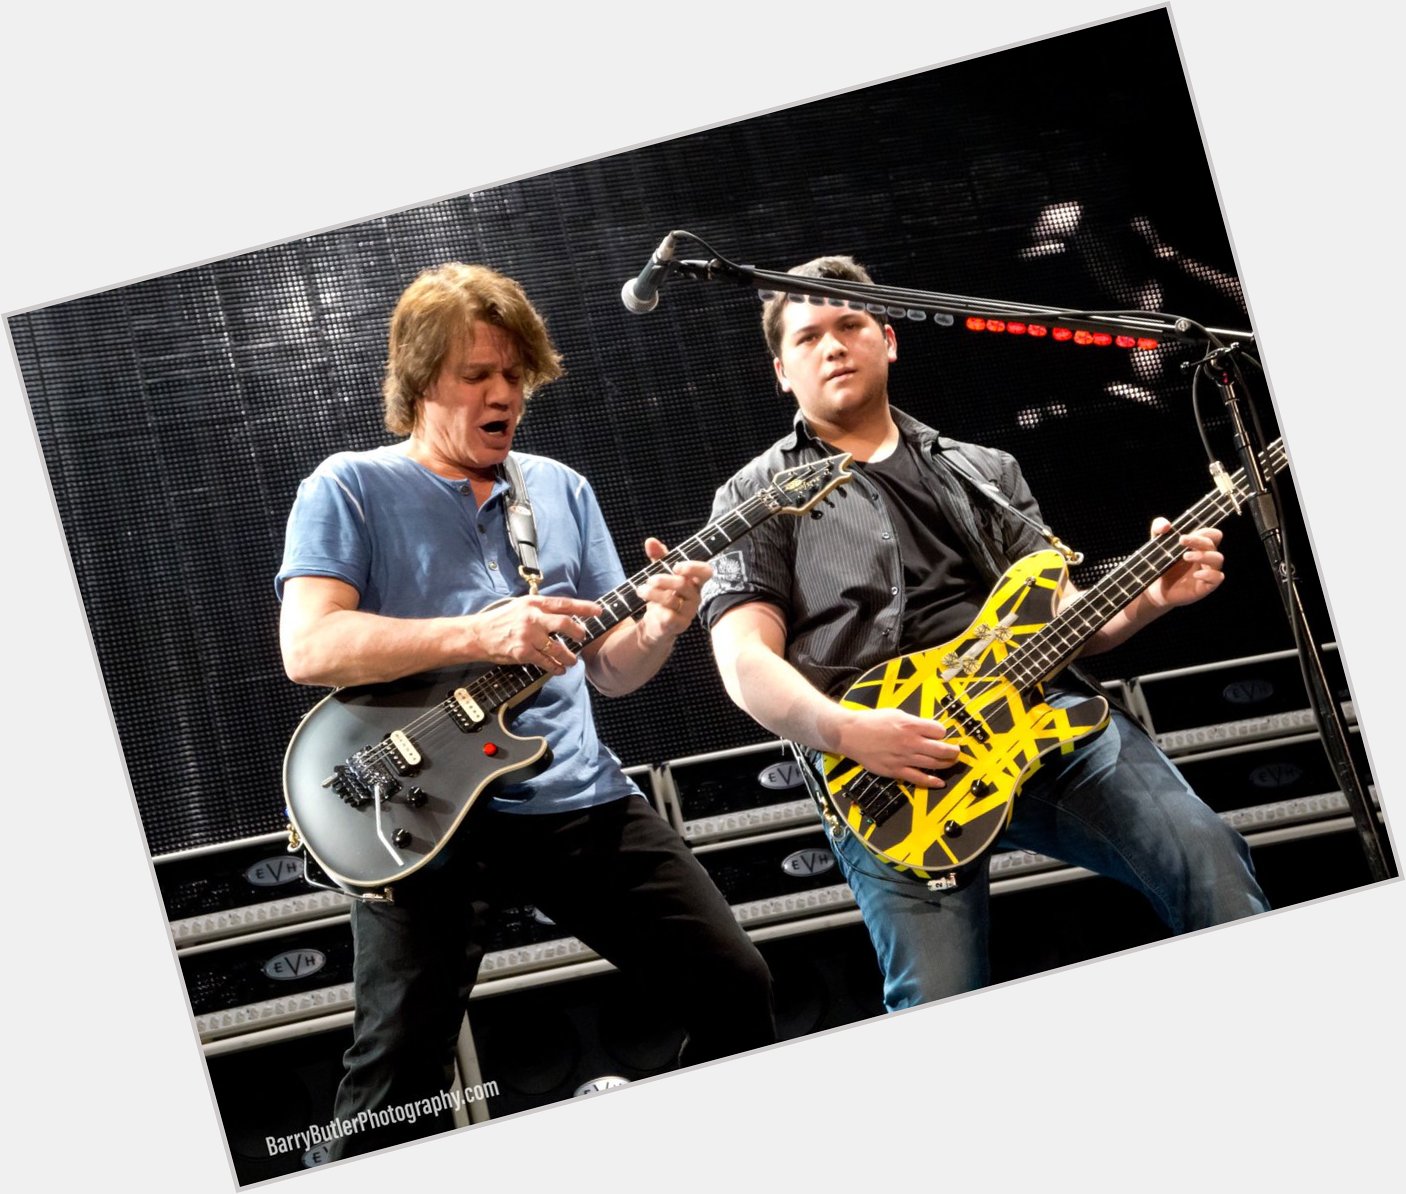 Happy Bday Wolfgang Van Halen. and play in Chicago tonight at the House of Blues. 